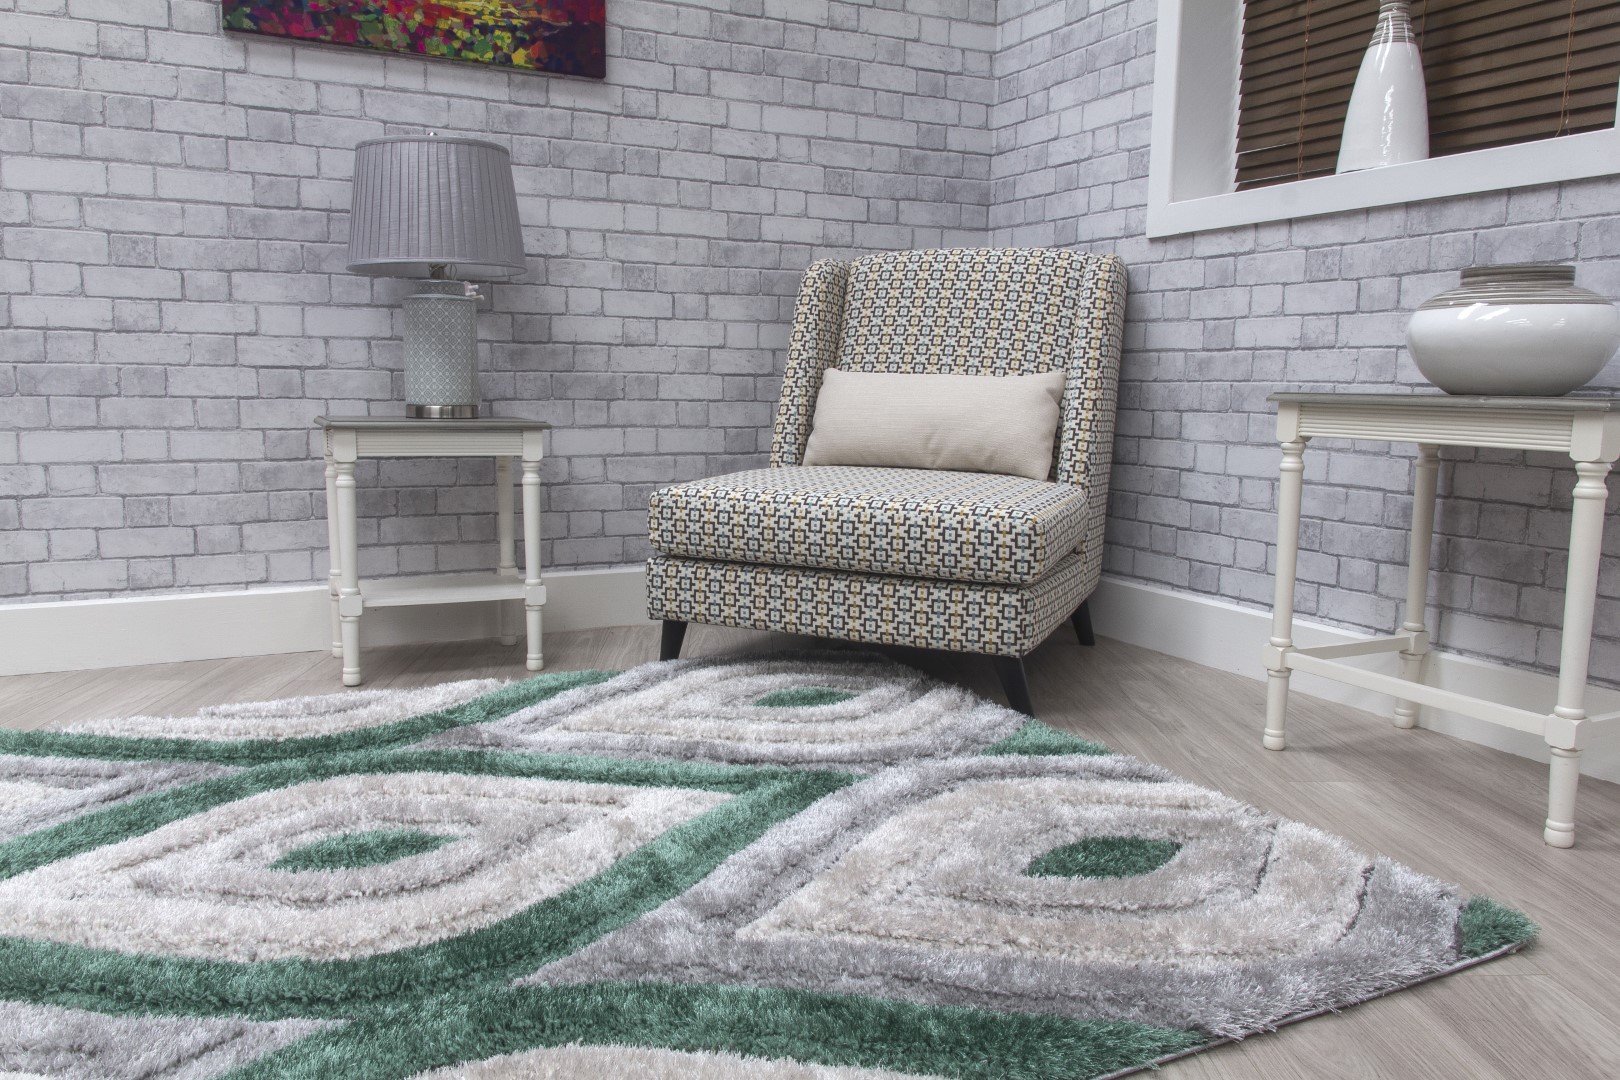 Main Benefits of Using Rugs in your Home